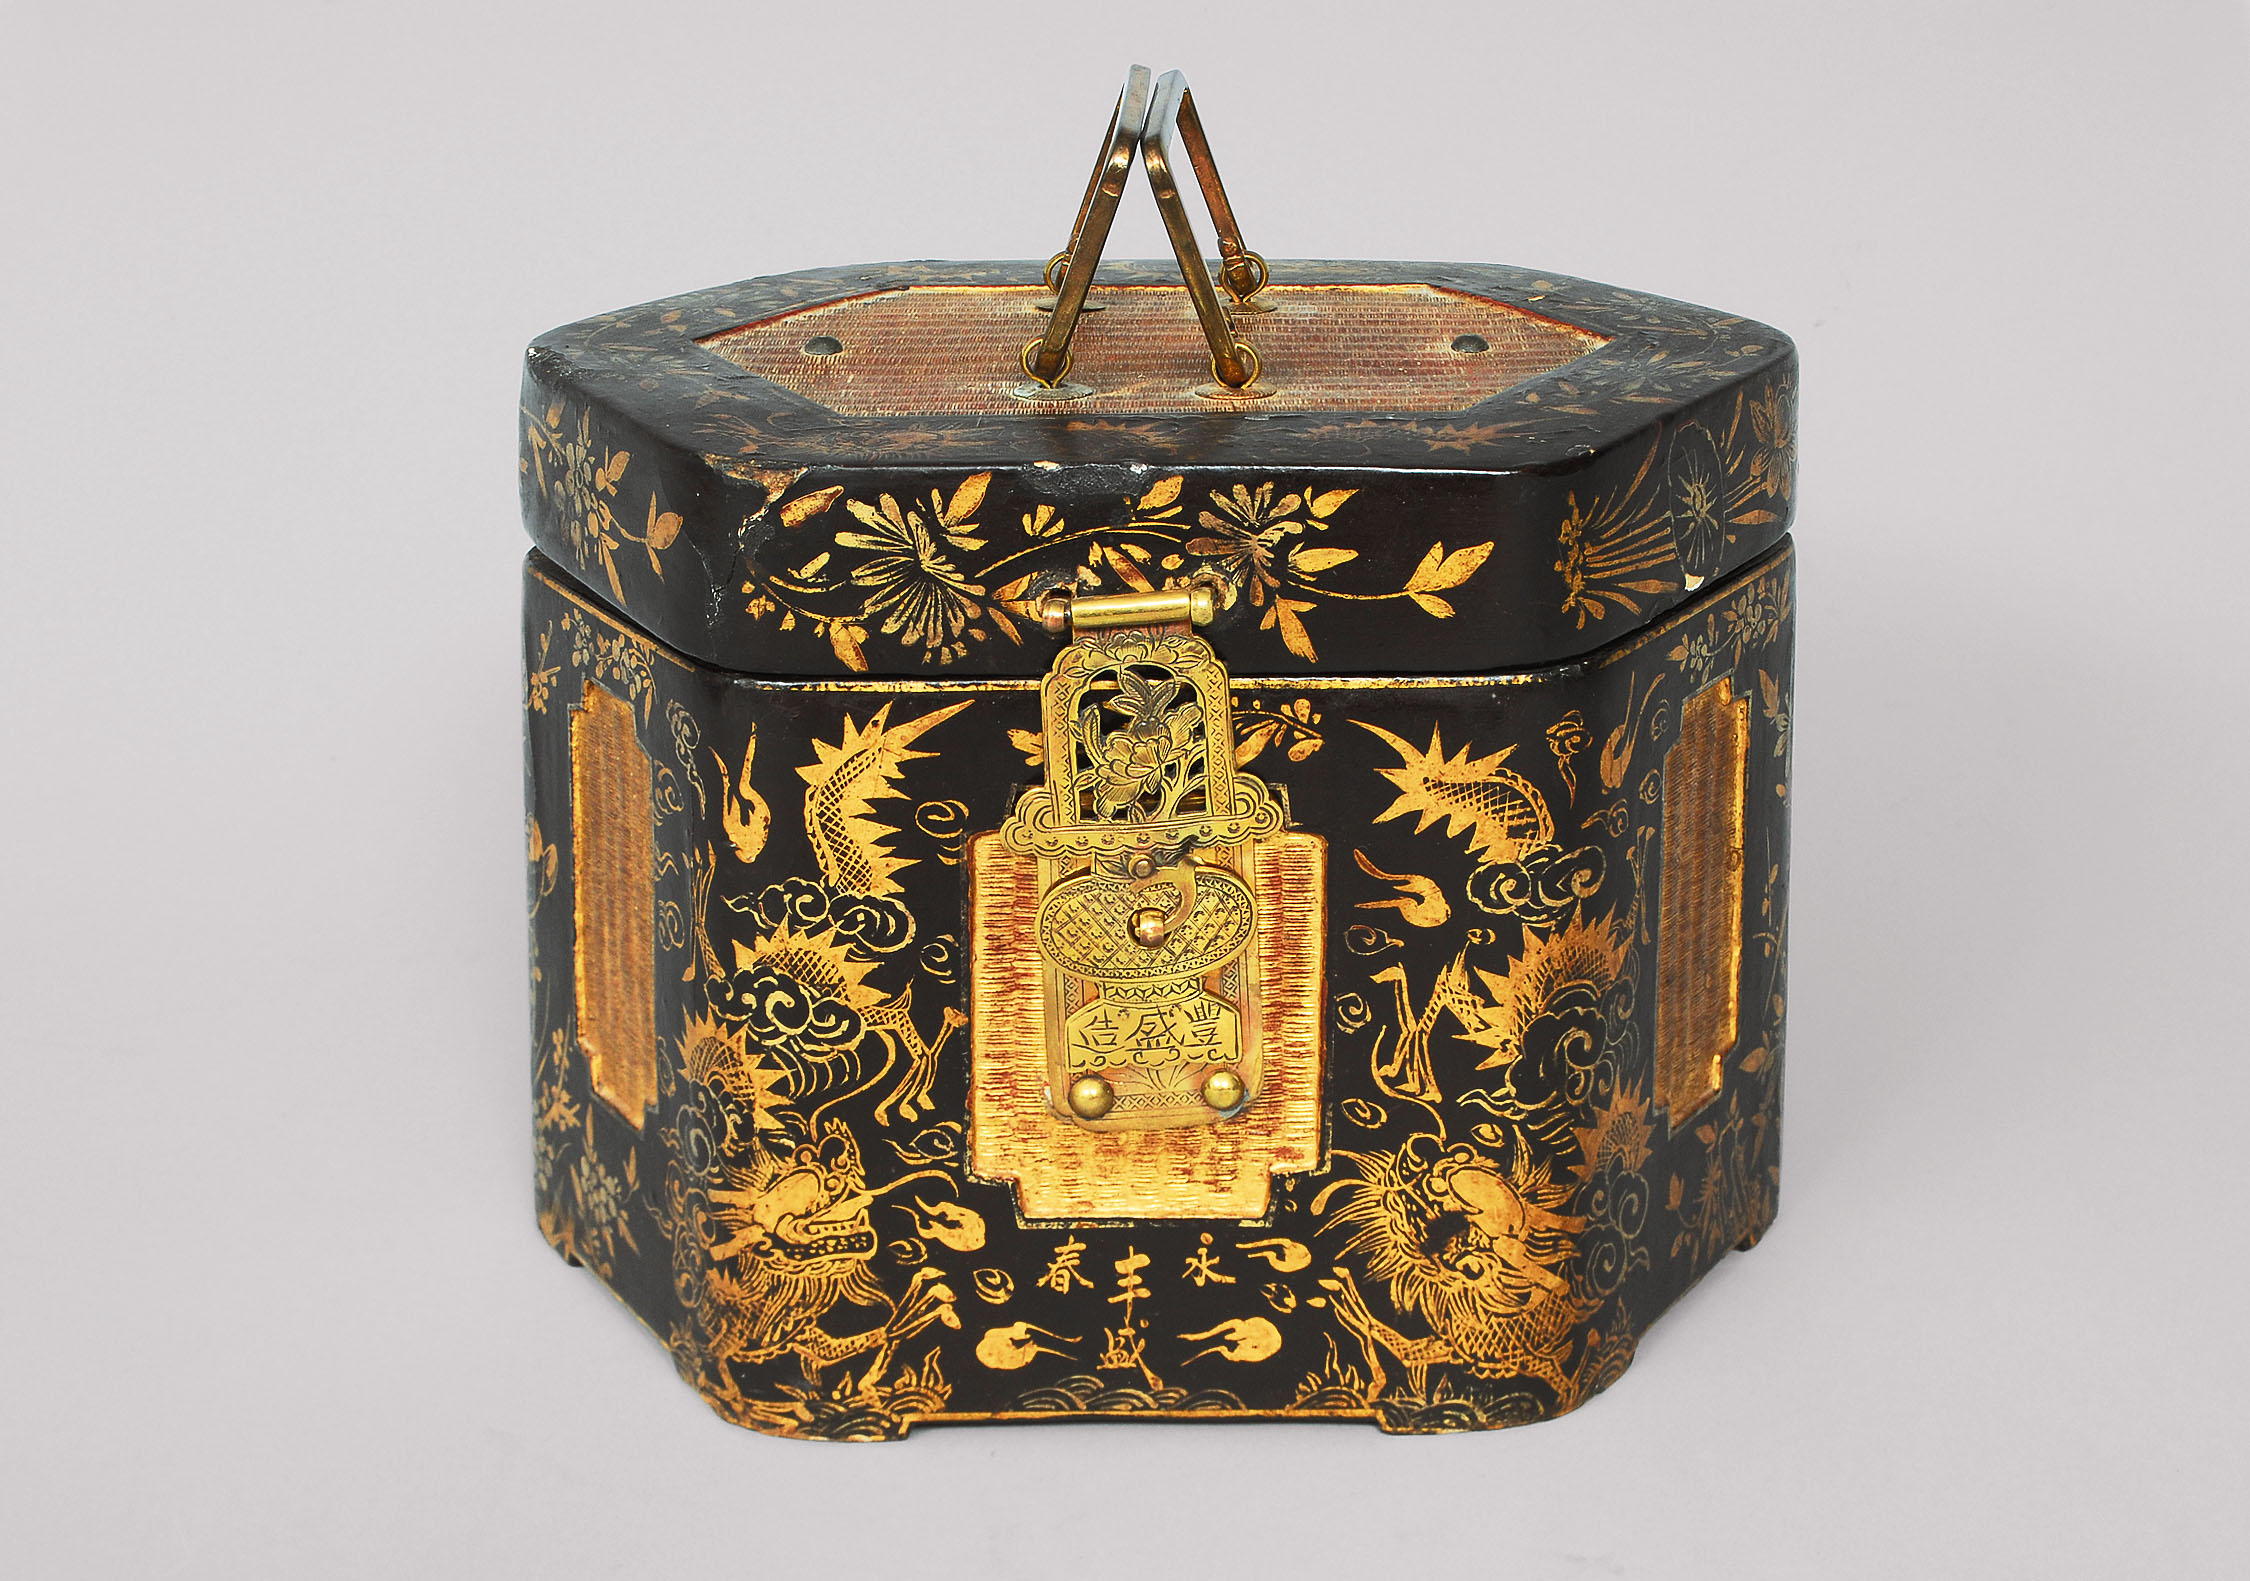 A lacquered box with paintings of flowers